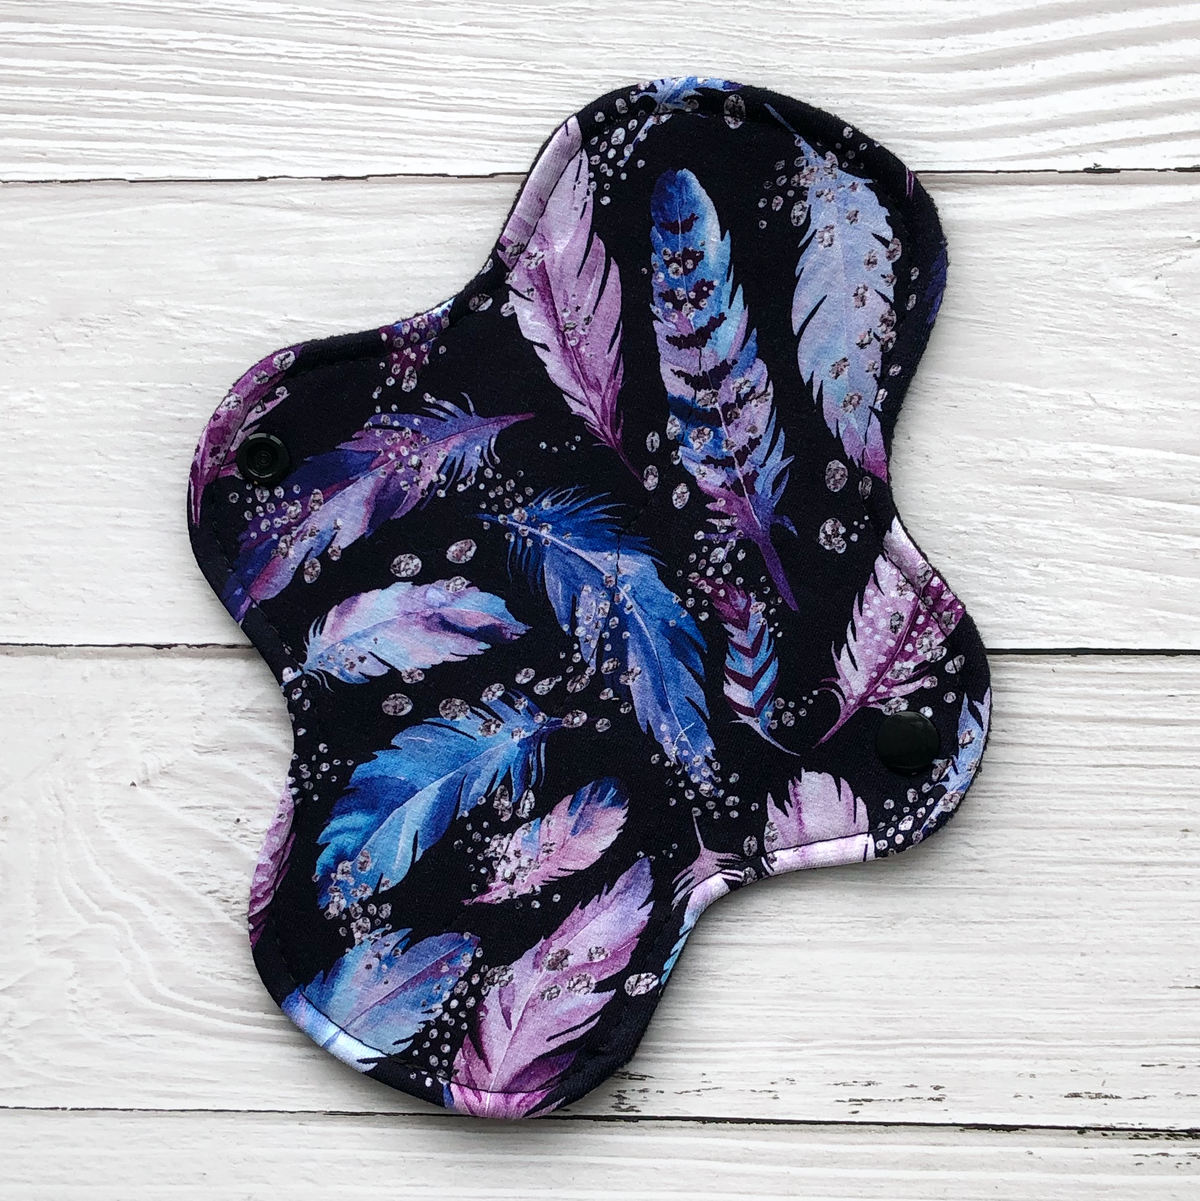 Light Absorbency Reusable Menstrual Pads: Purple Feathers - Amie Pads